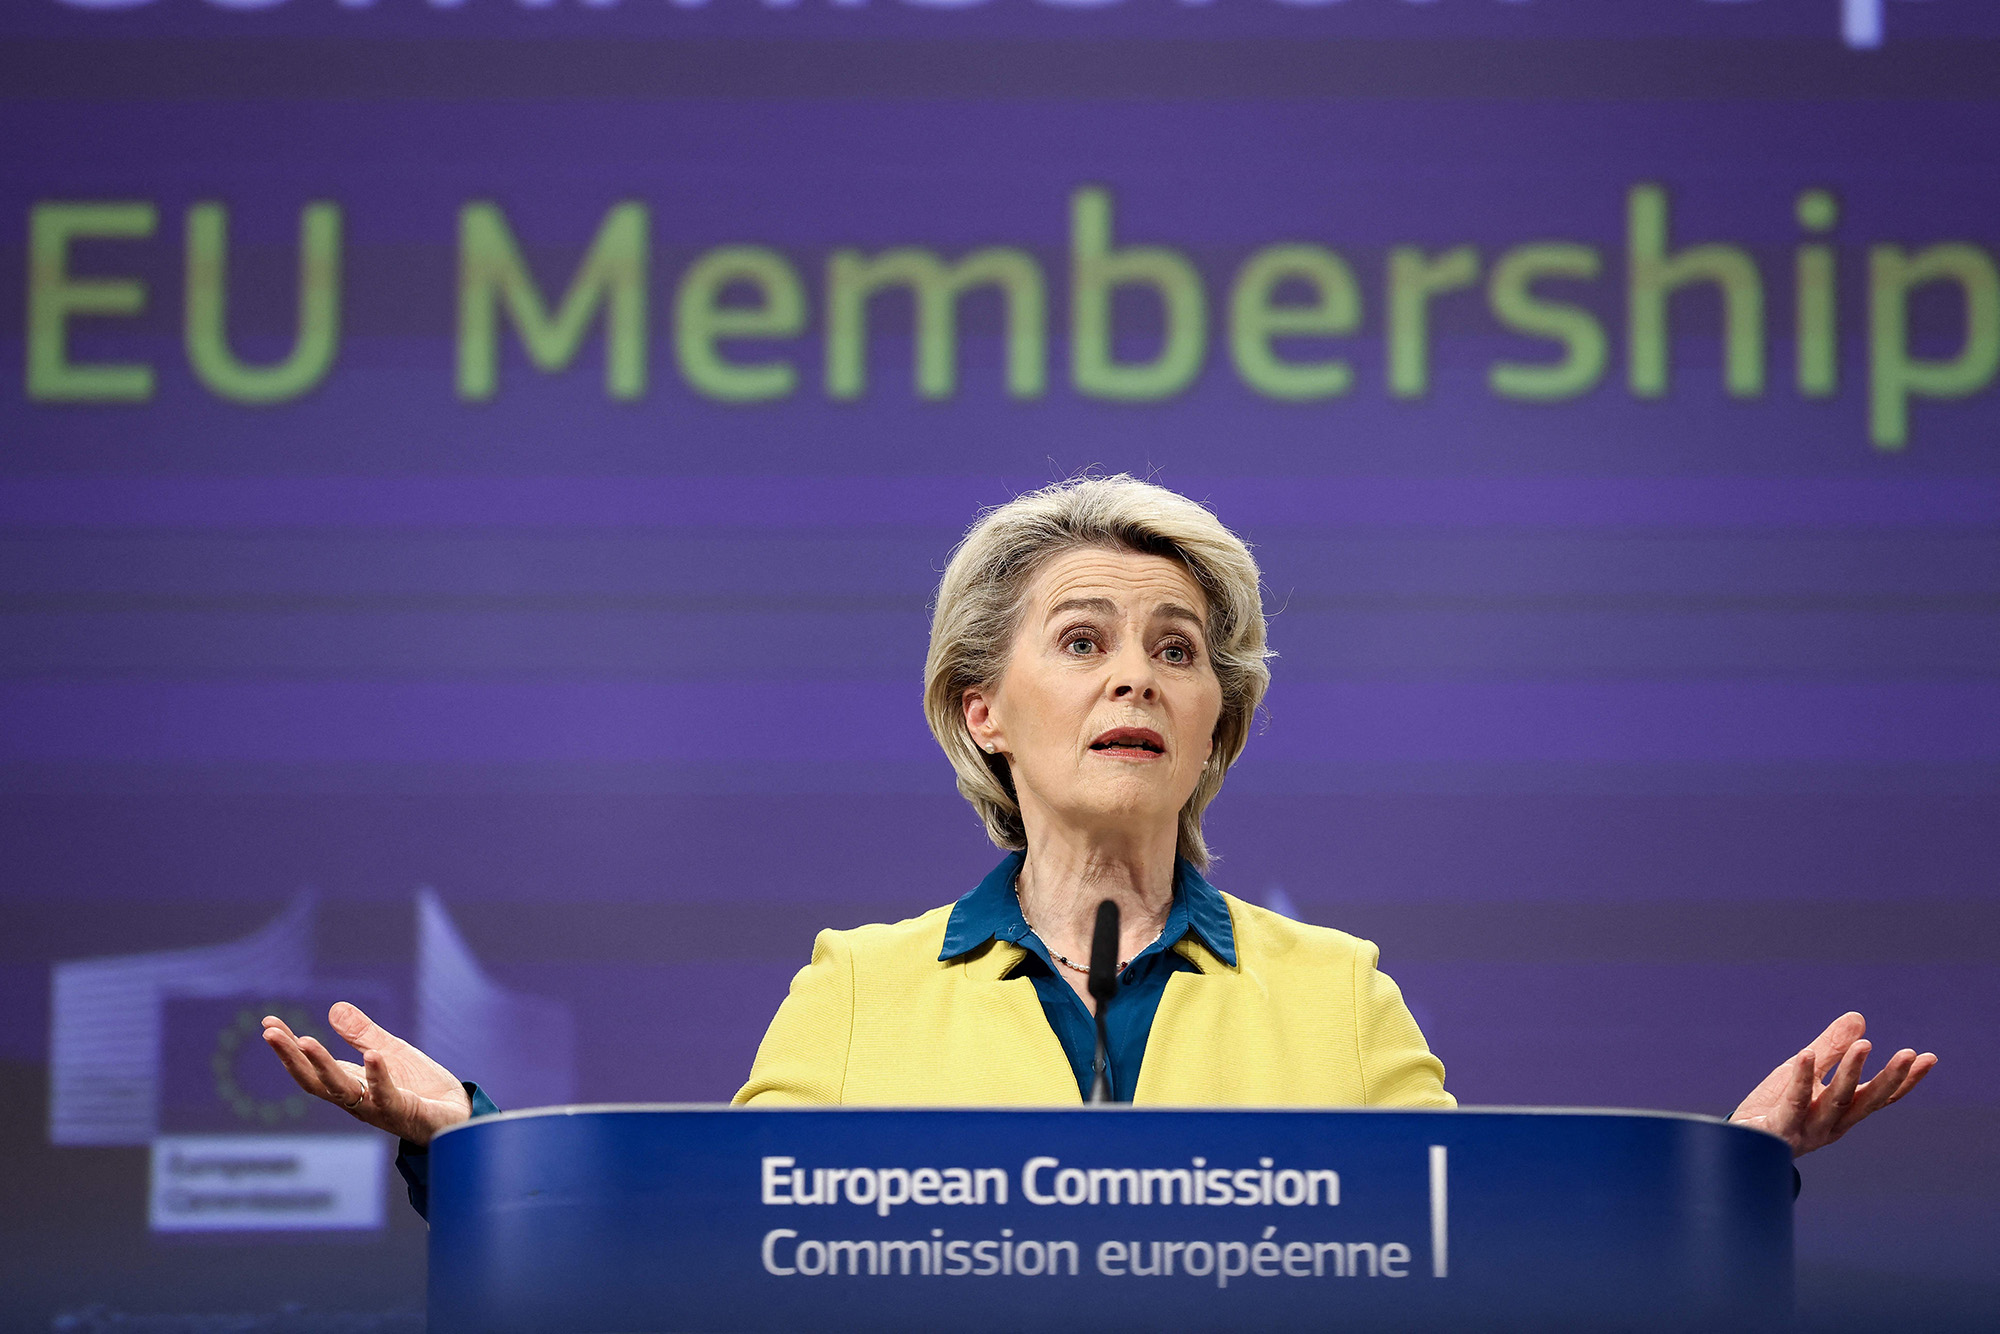 European Commission President Ursula von der Leyen gives a press conference on the EU membership applications by Ukraine, Moldova and Georgia at the European Commission headquarters in Brussels, Belgium, on June 17.